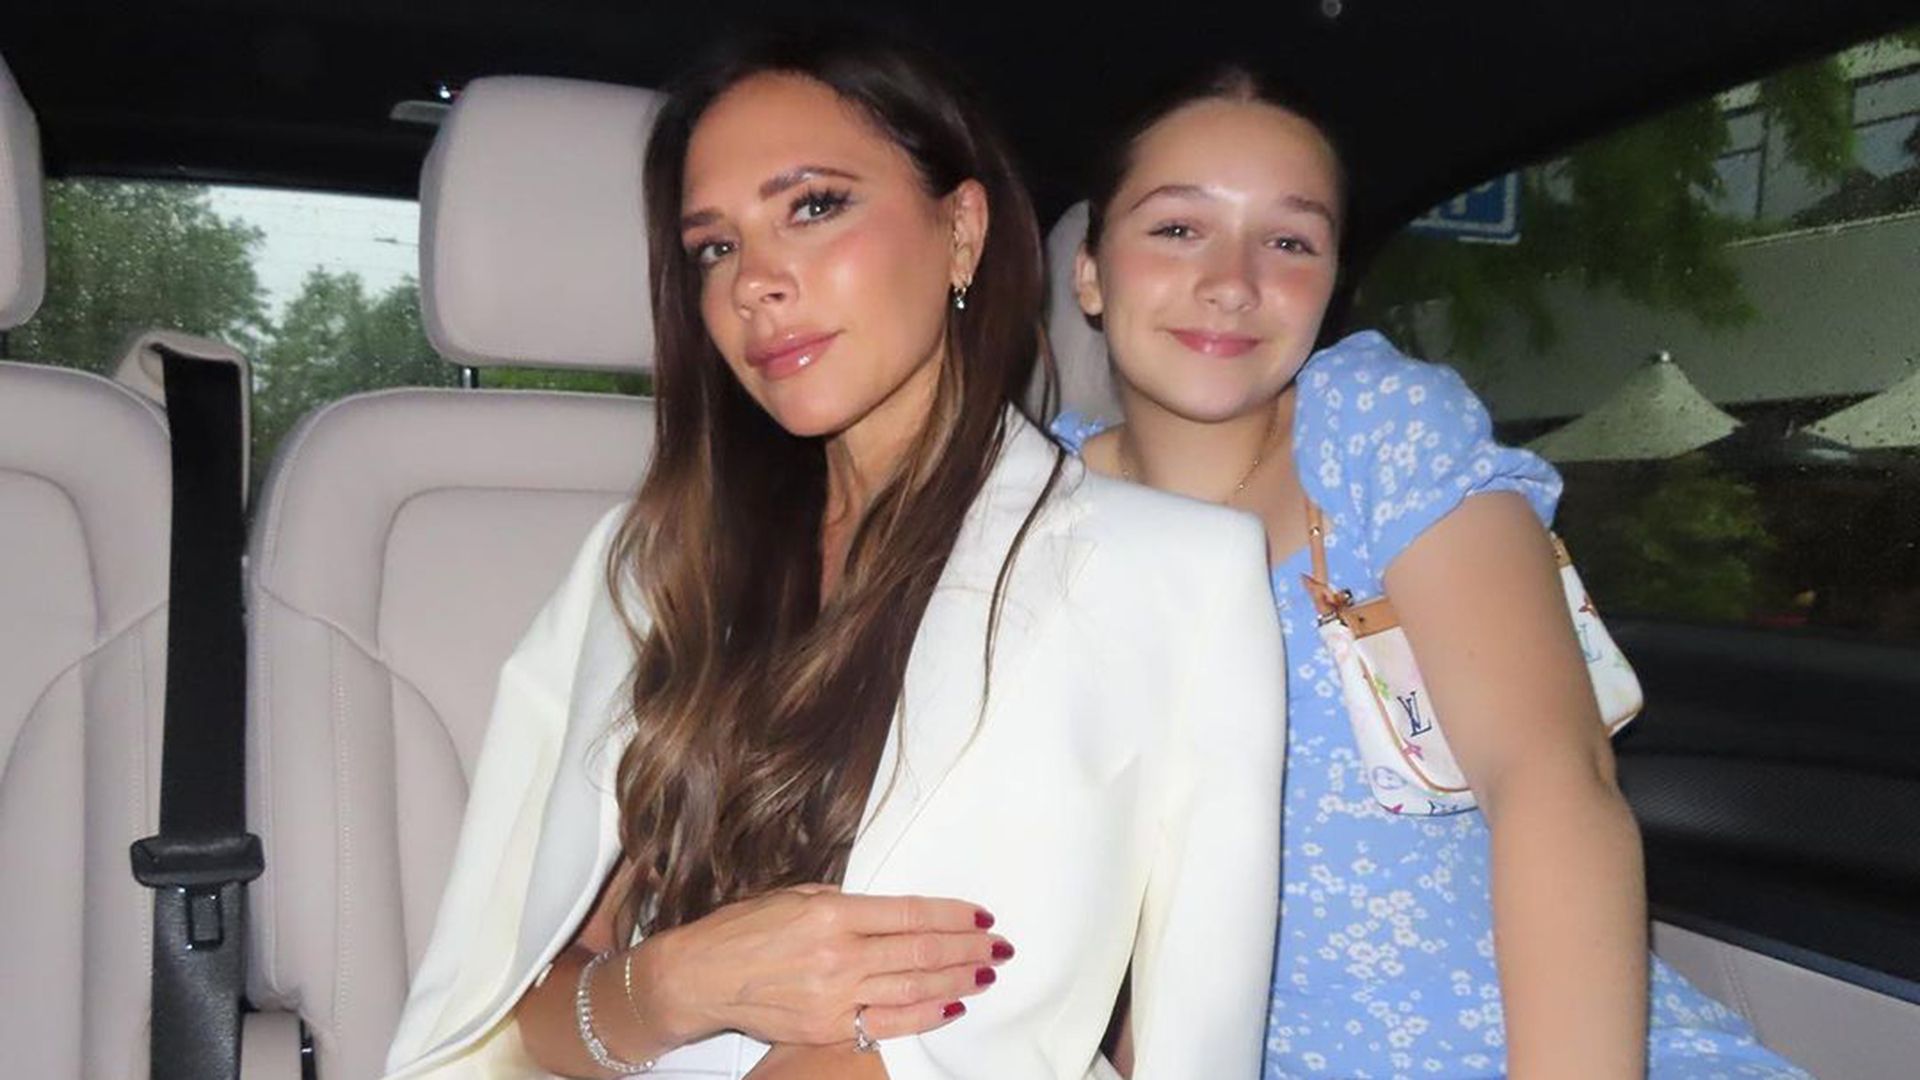 Victoria Beckham makes heartbreaking confession about raising daughter Harper - 'I was bullied a lot'